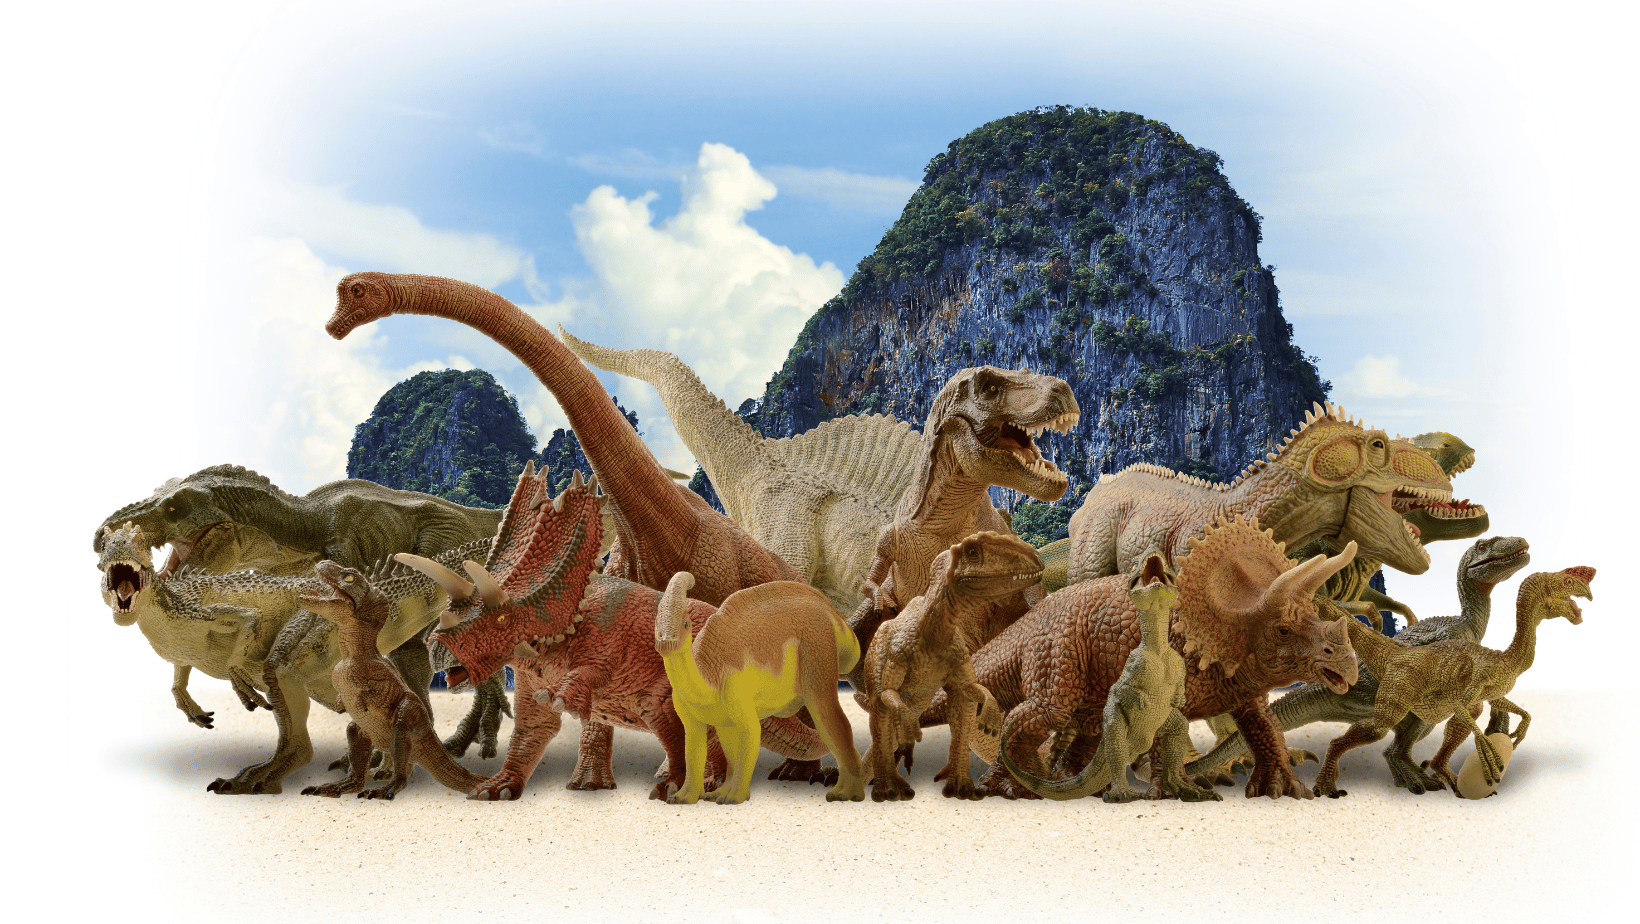 25 Types of Dinosaur Species You Should Know About